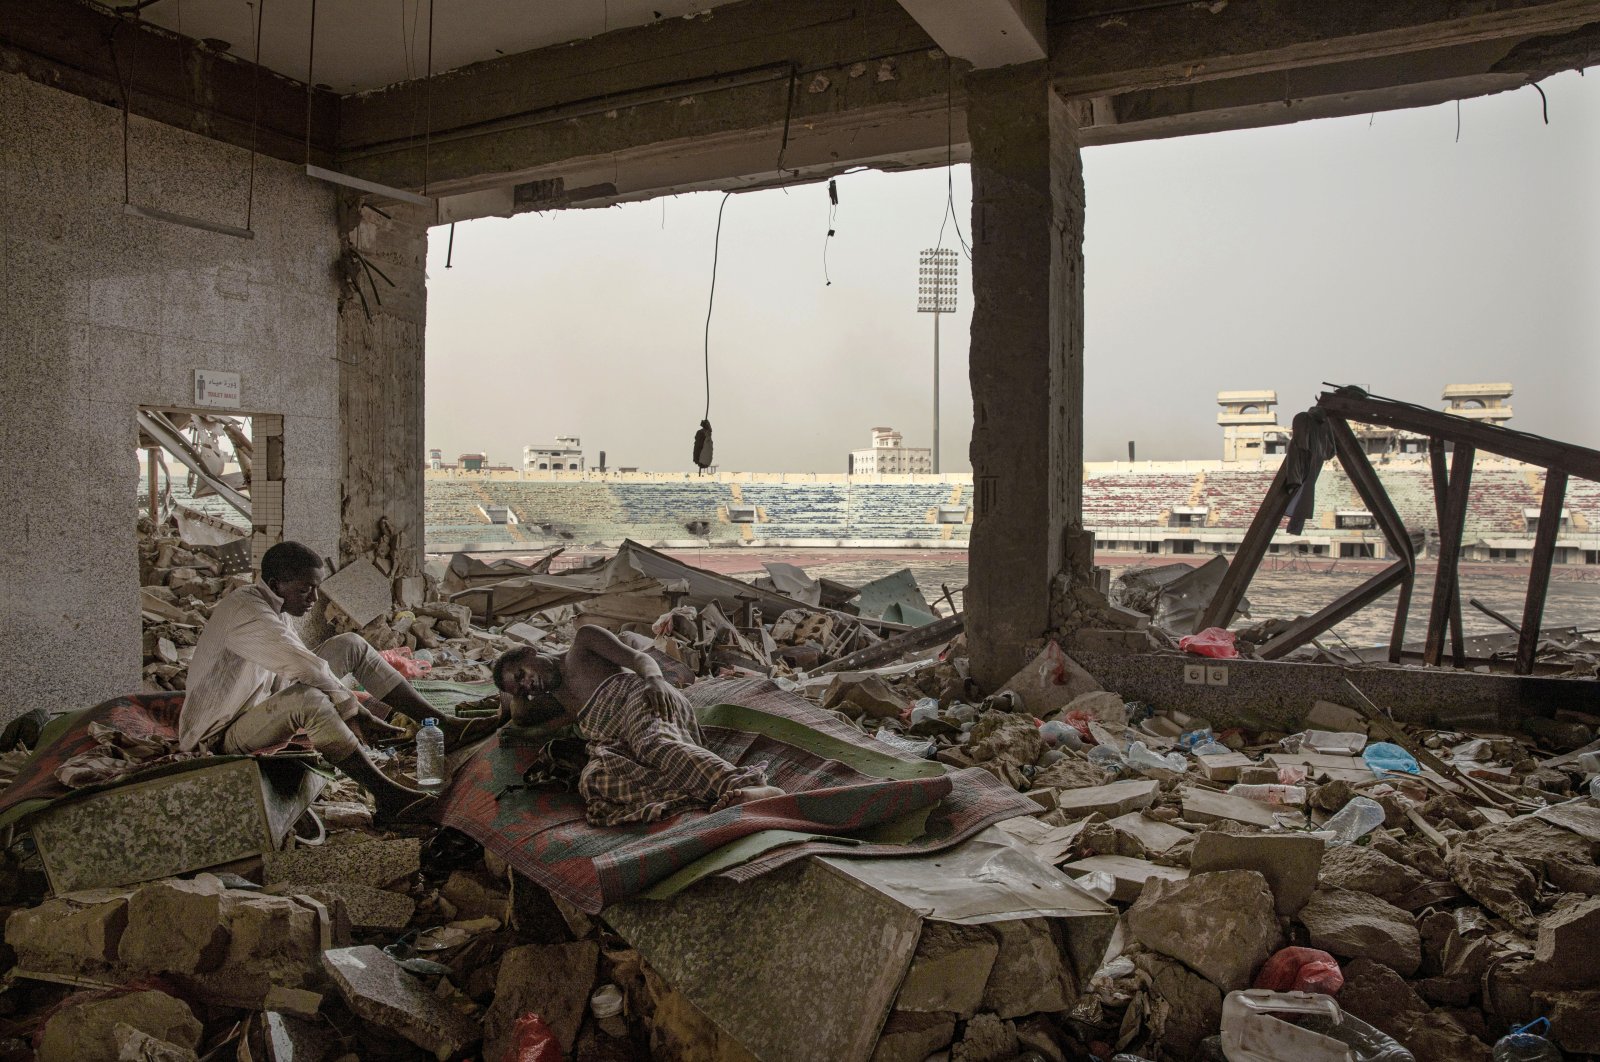 Ethiopian migrants take shelter in the "22nd May Soccer Stadium," destroyed by war, in Aden, Yemen, July 21, 2019. (AP Photo)